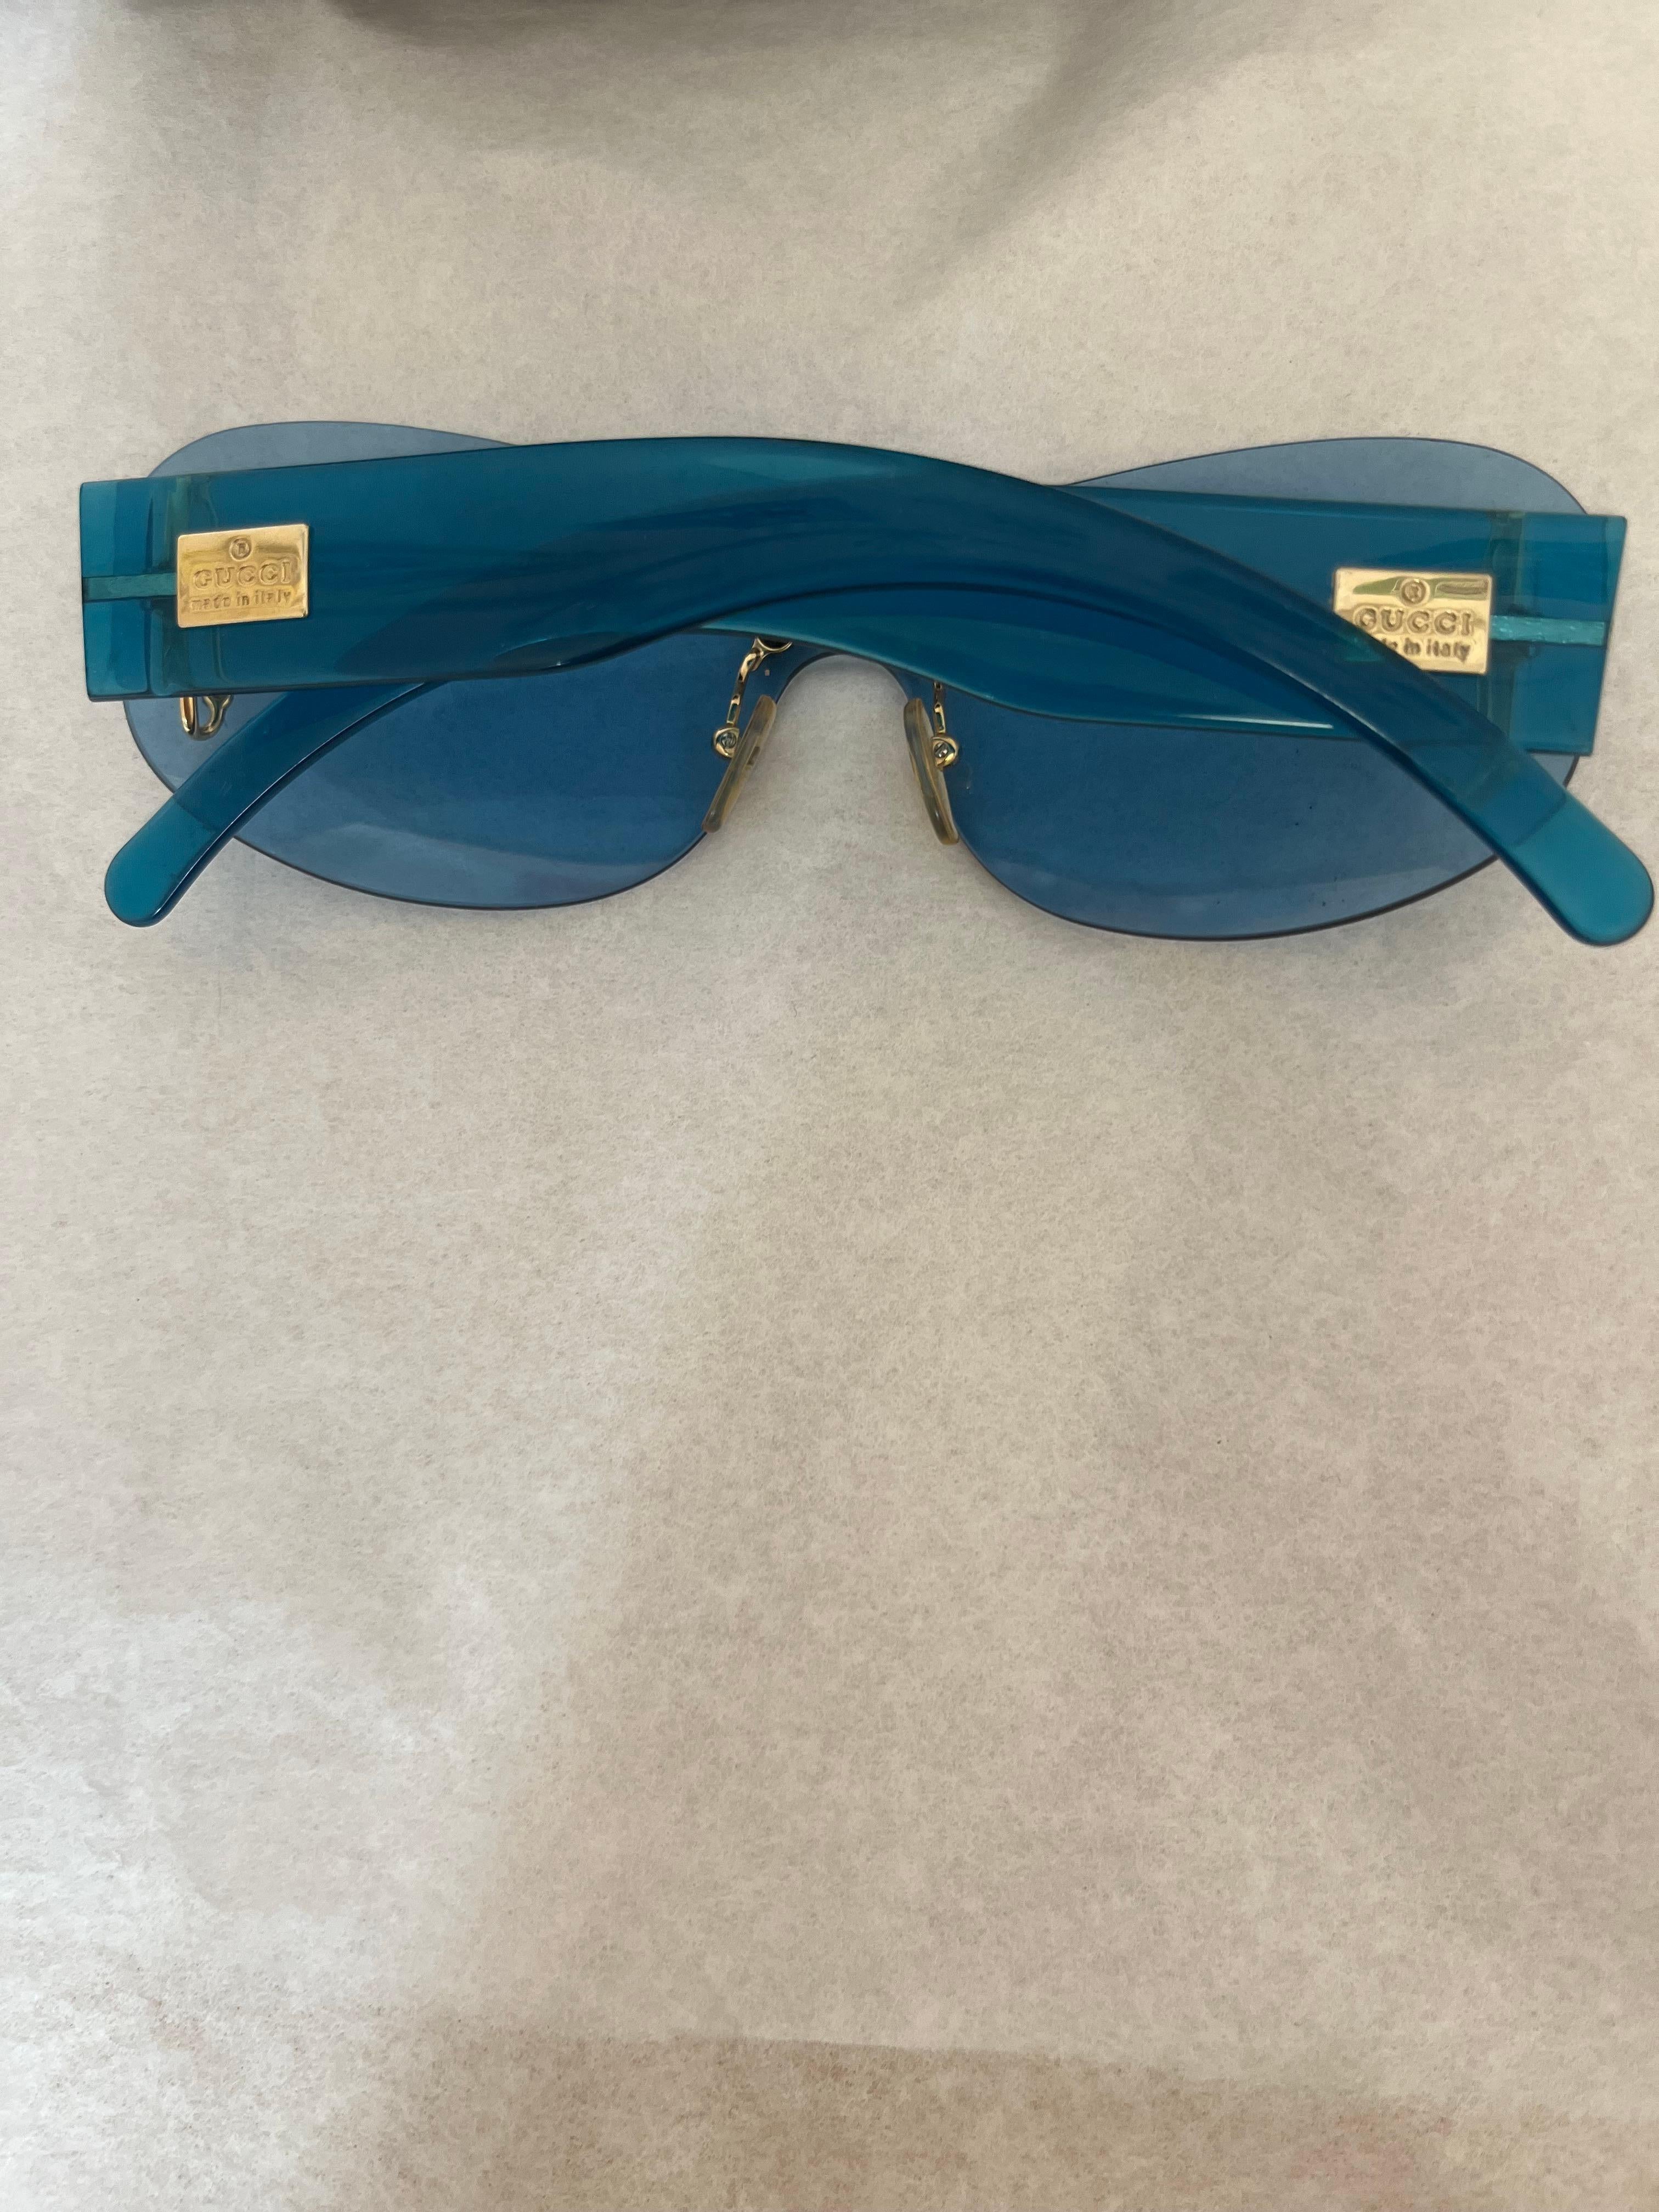 Gucci 1990s Sunglasses w/Case In Excellent Condition For Sale In Port Hope, ON